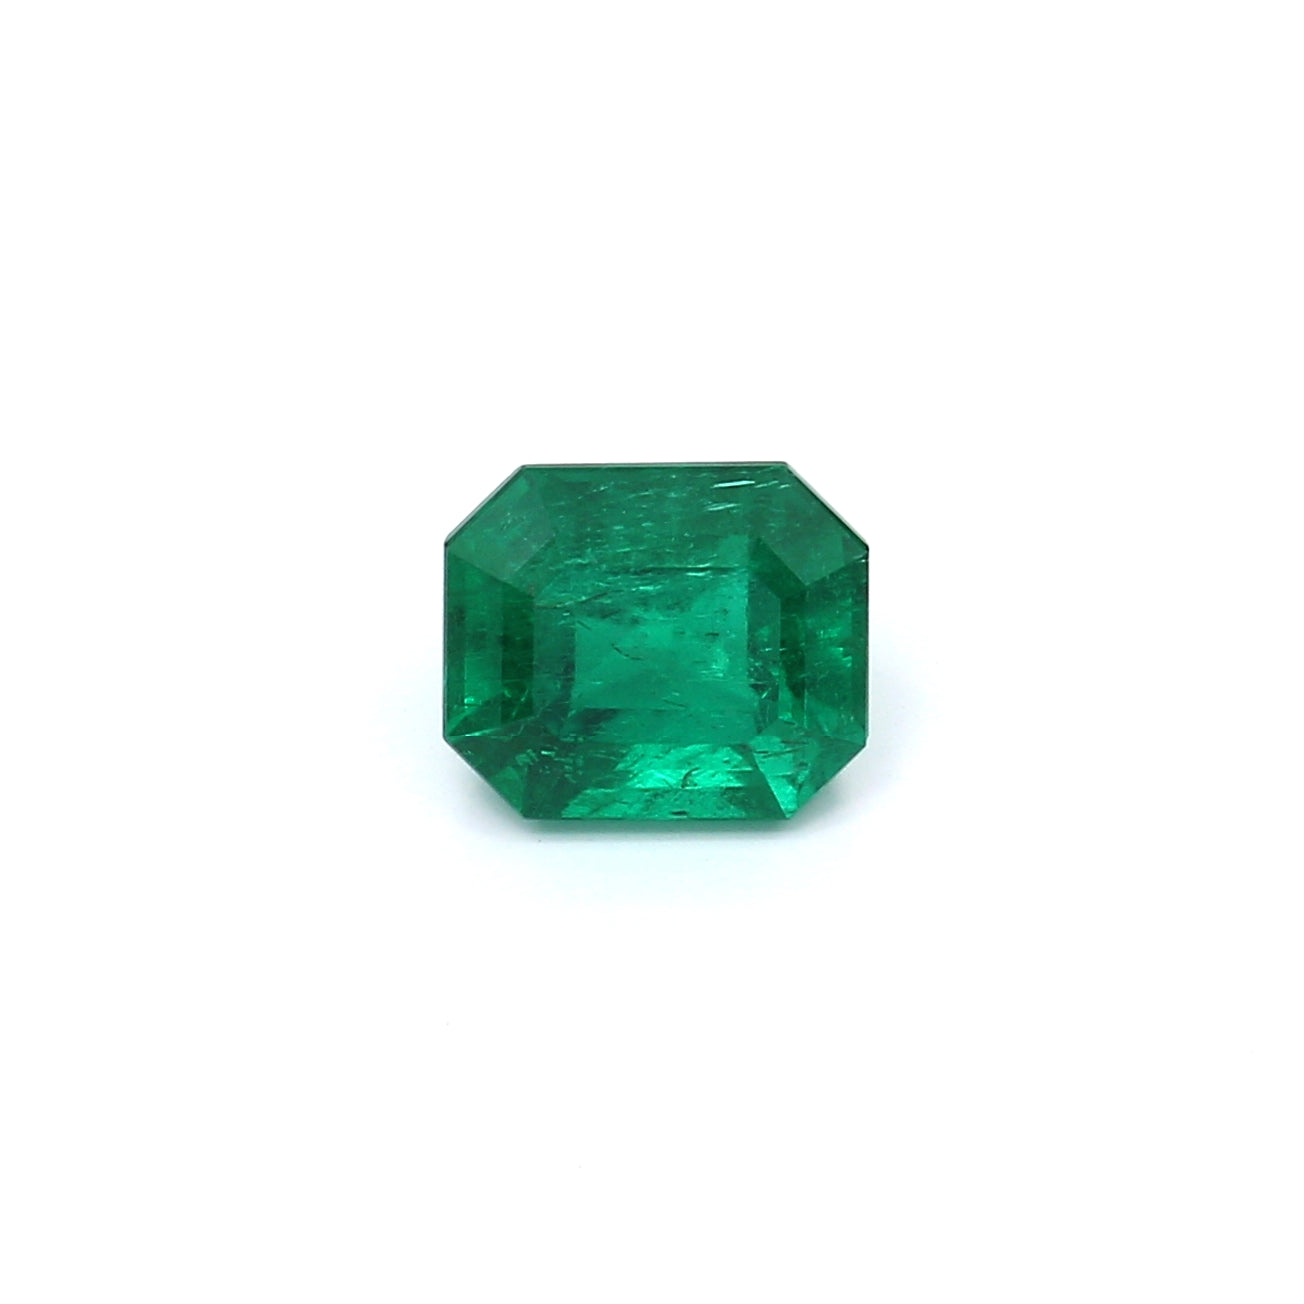 1.62ct Octagon Emerald, Moderate Oil, Colombia - 7.47 x 6.39 x 5.16mm